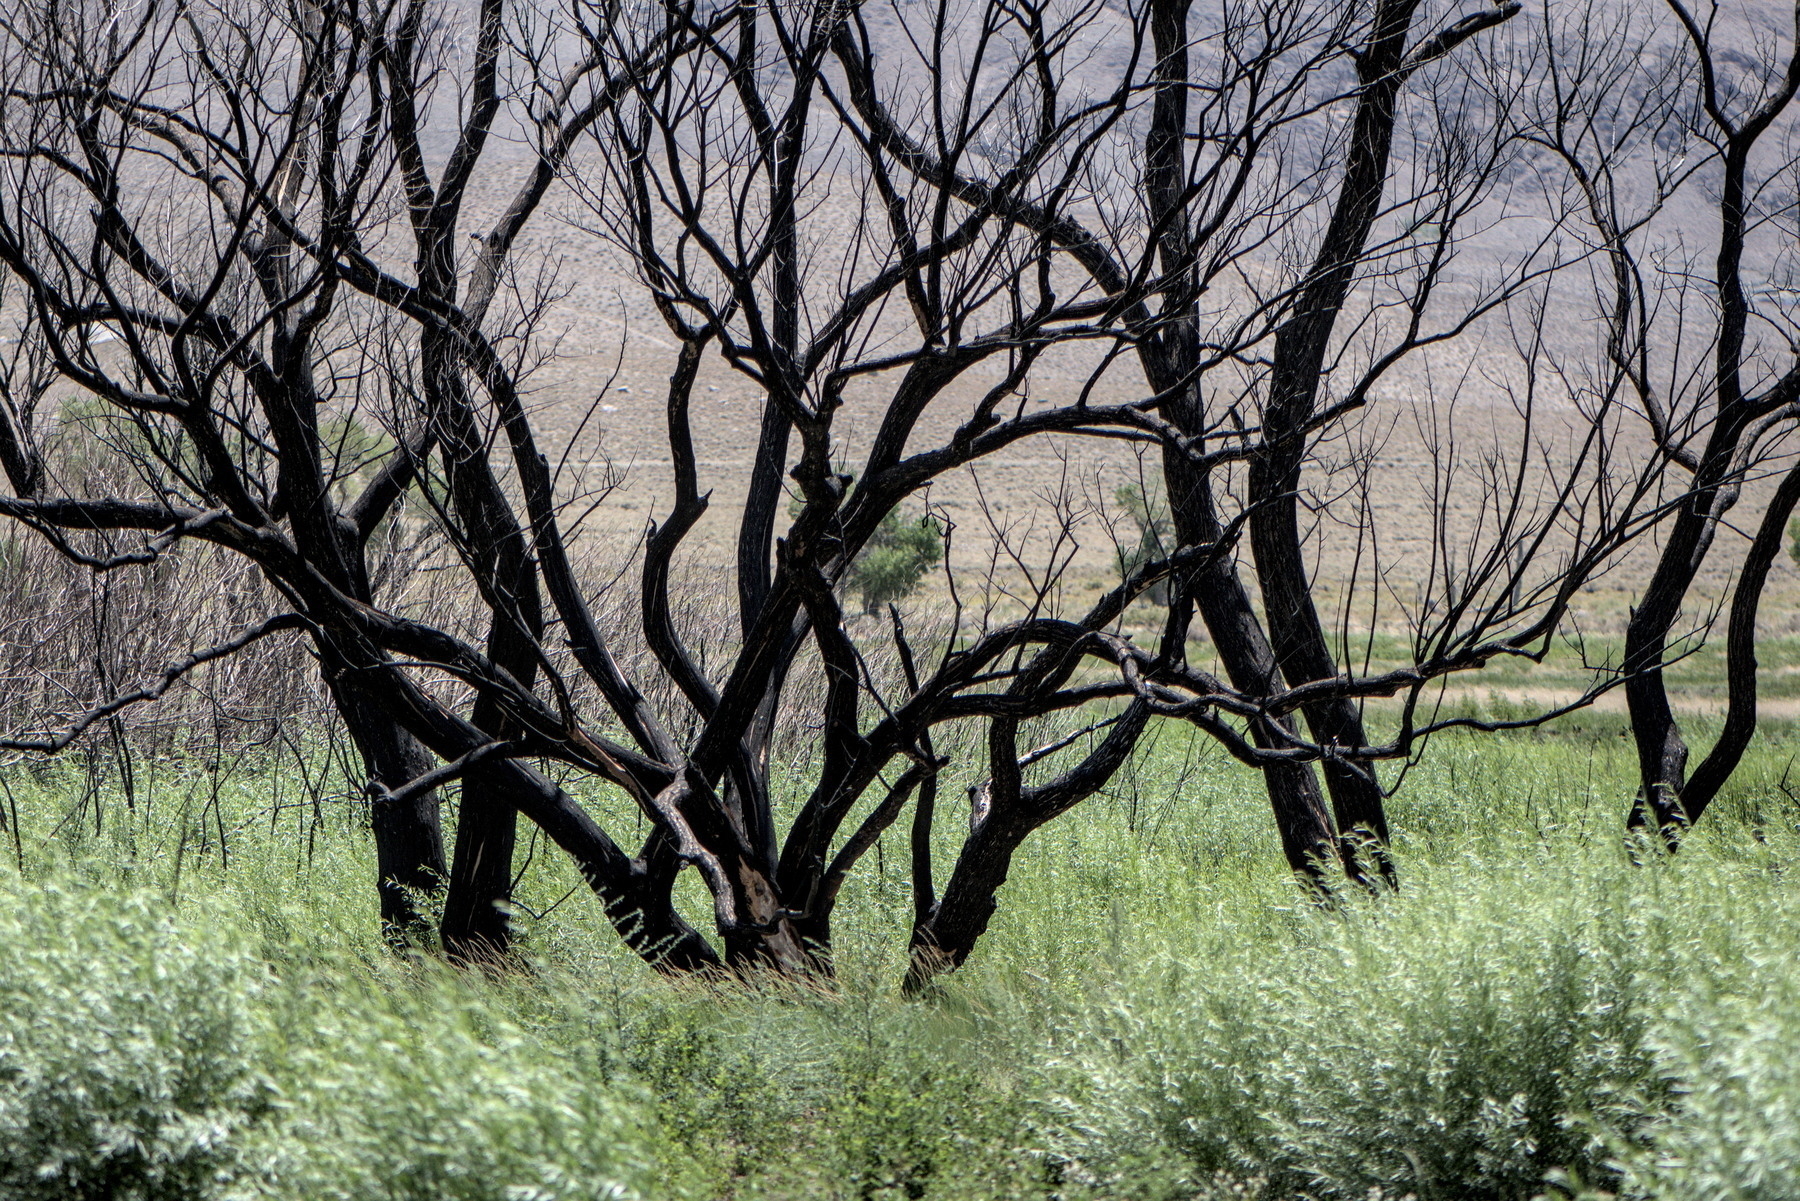 Trees blackened by fire amid tall green grasses.